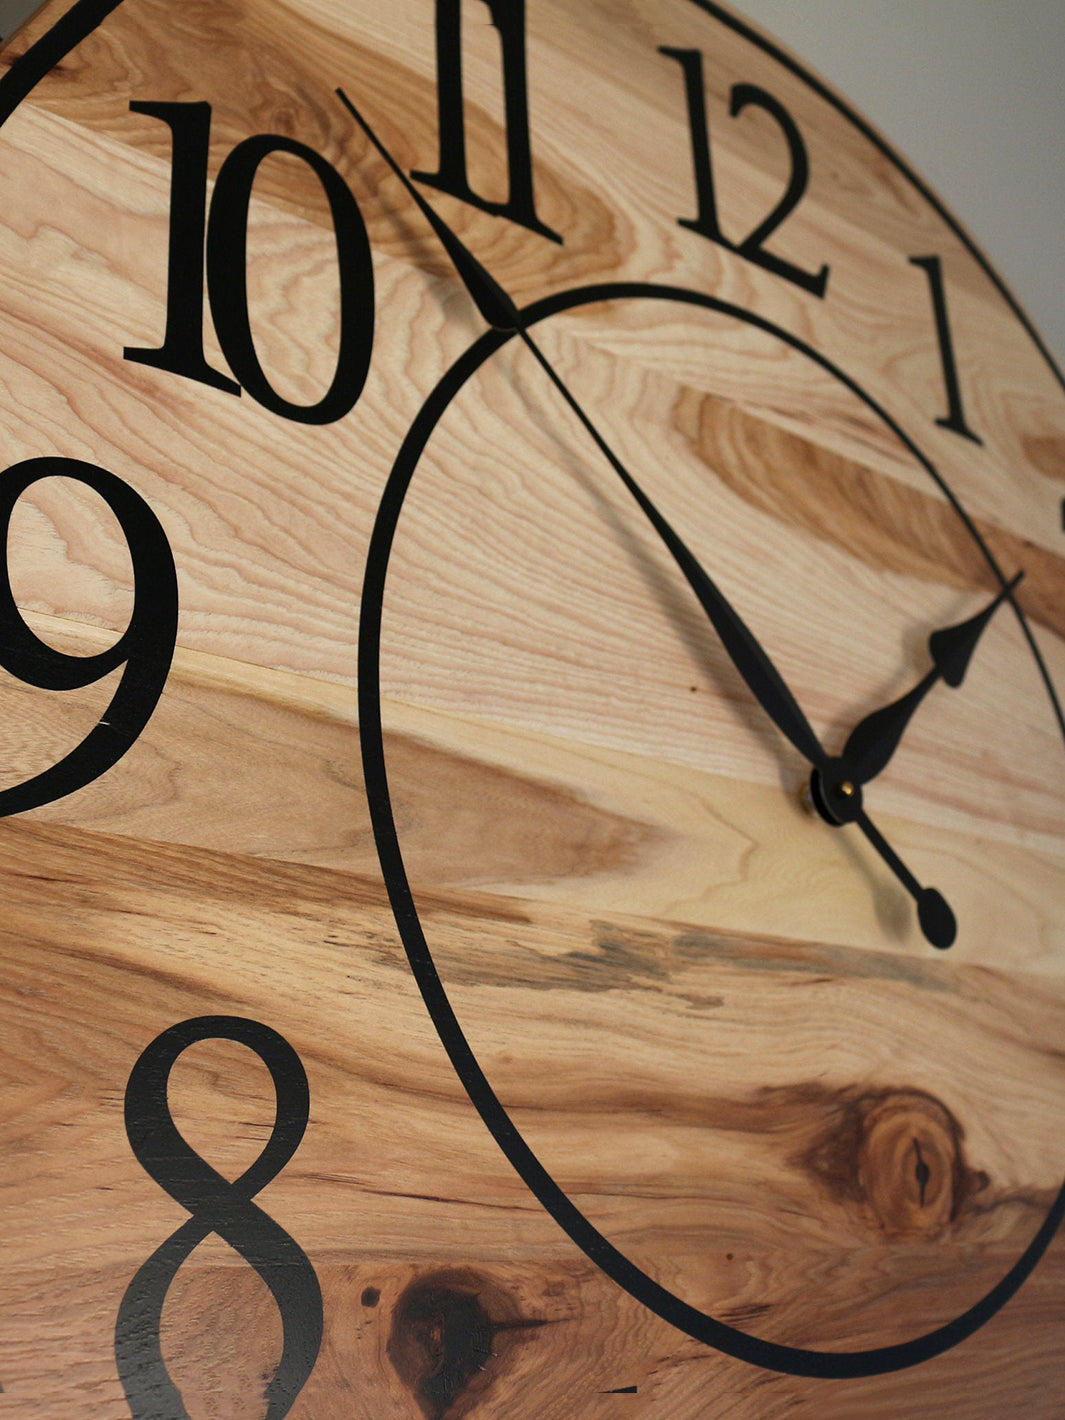 Solid Hickory Wood Wall Clock with Numbers and Lines Earthly Comfort Clocks 590-13